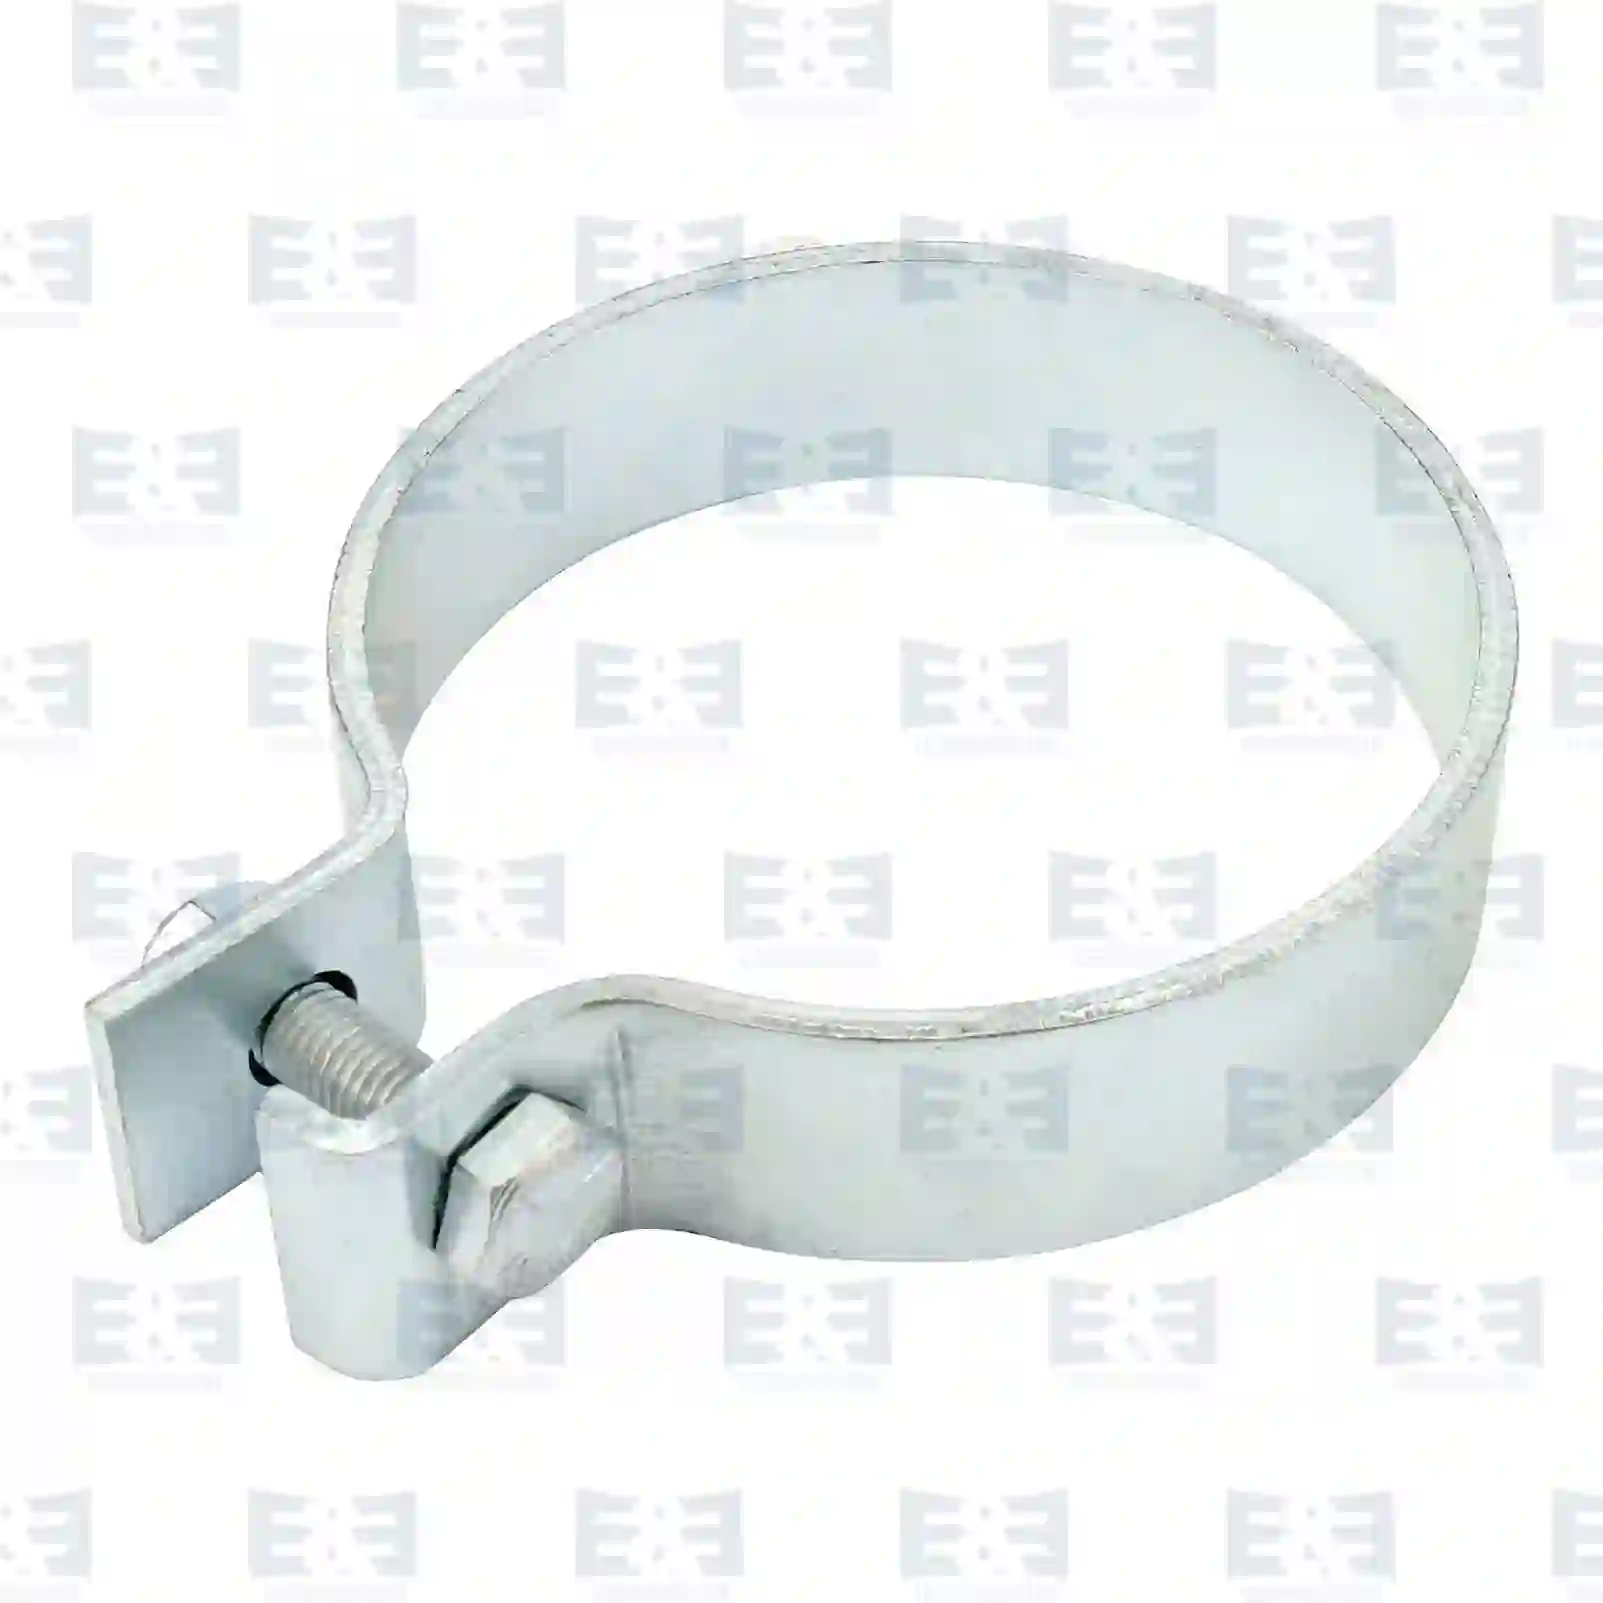 Exhaust Pipe, front Clamp, EE No 2E2204024 ,  oem no:1701991, 1702279, 805191, 00179551, 81974202017, 83974200500, 91974200161, 071555104501, 9404920240, 180140700, 179-3400112-07, 179-3400160-10, ZG10268-0008 E&E Truck Spare Parts | Truck Spare Parts, Auotomotive Spare Parts